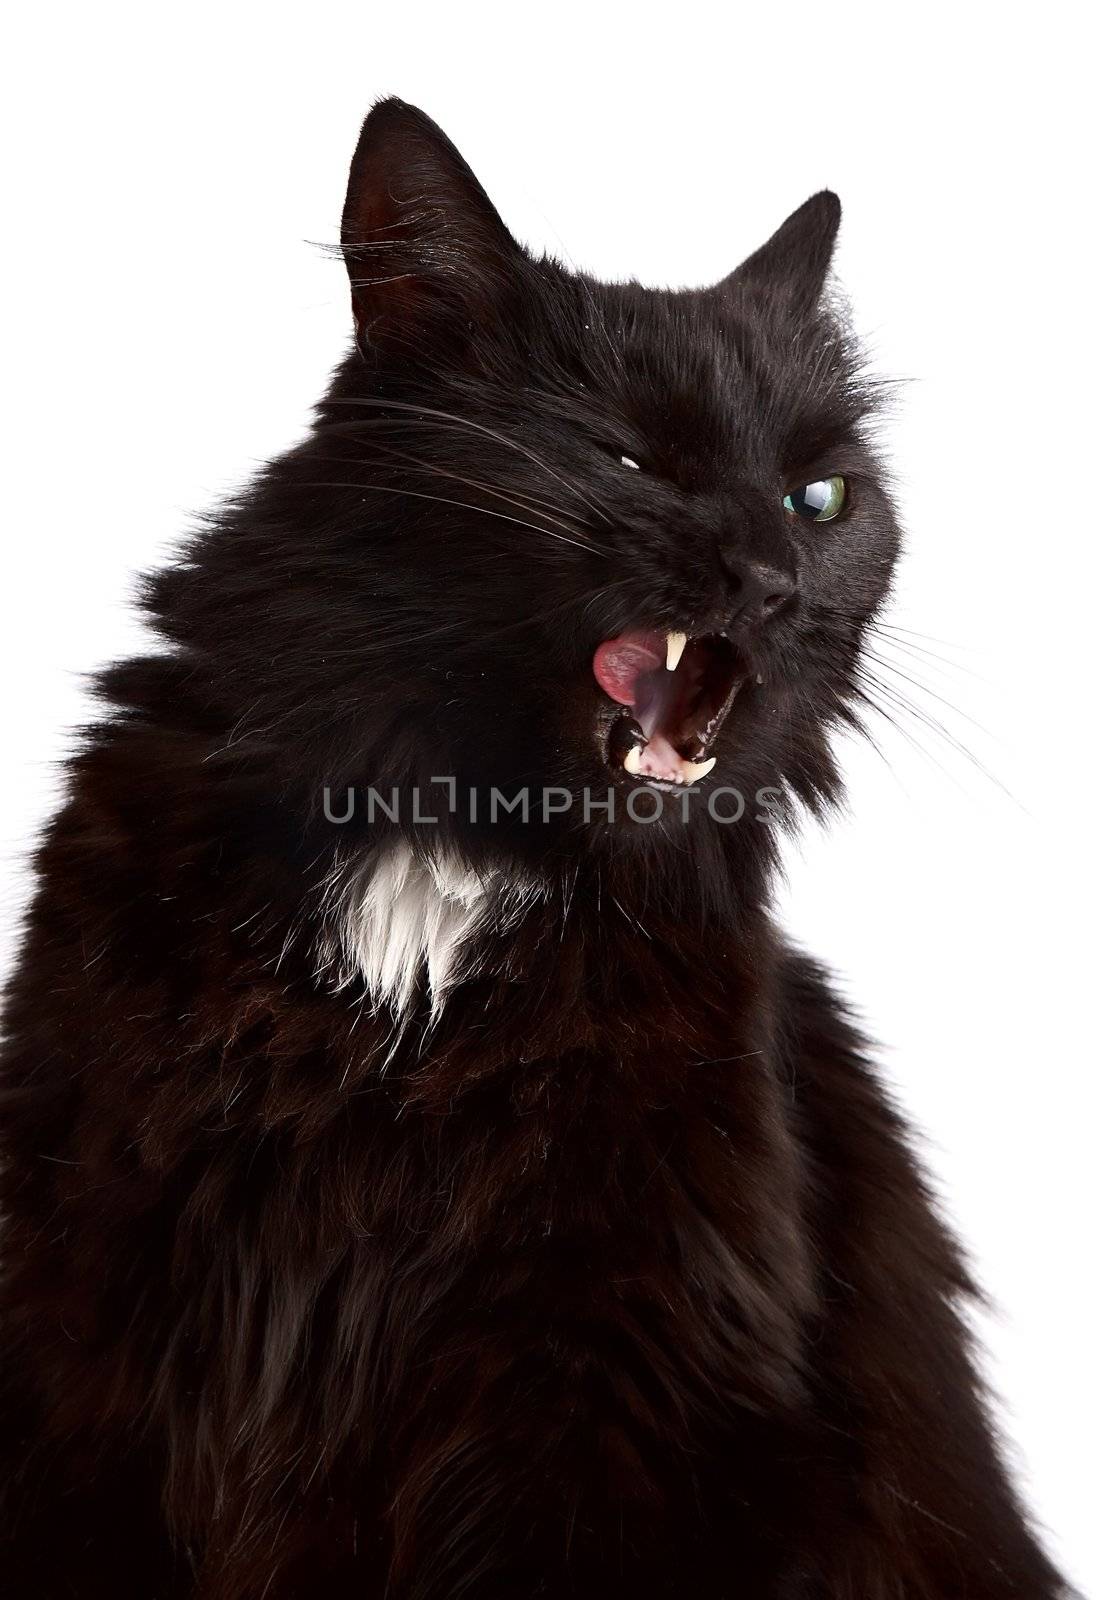 The blinked licking lips cat on a white background